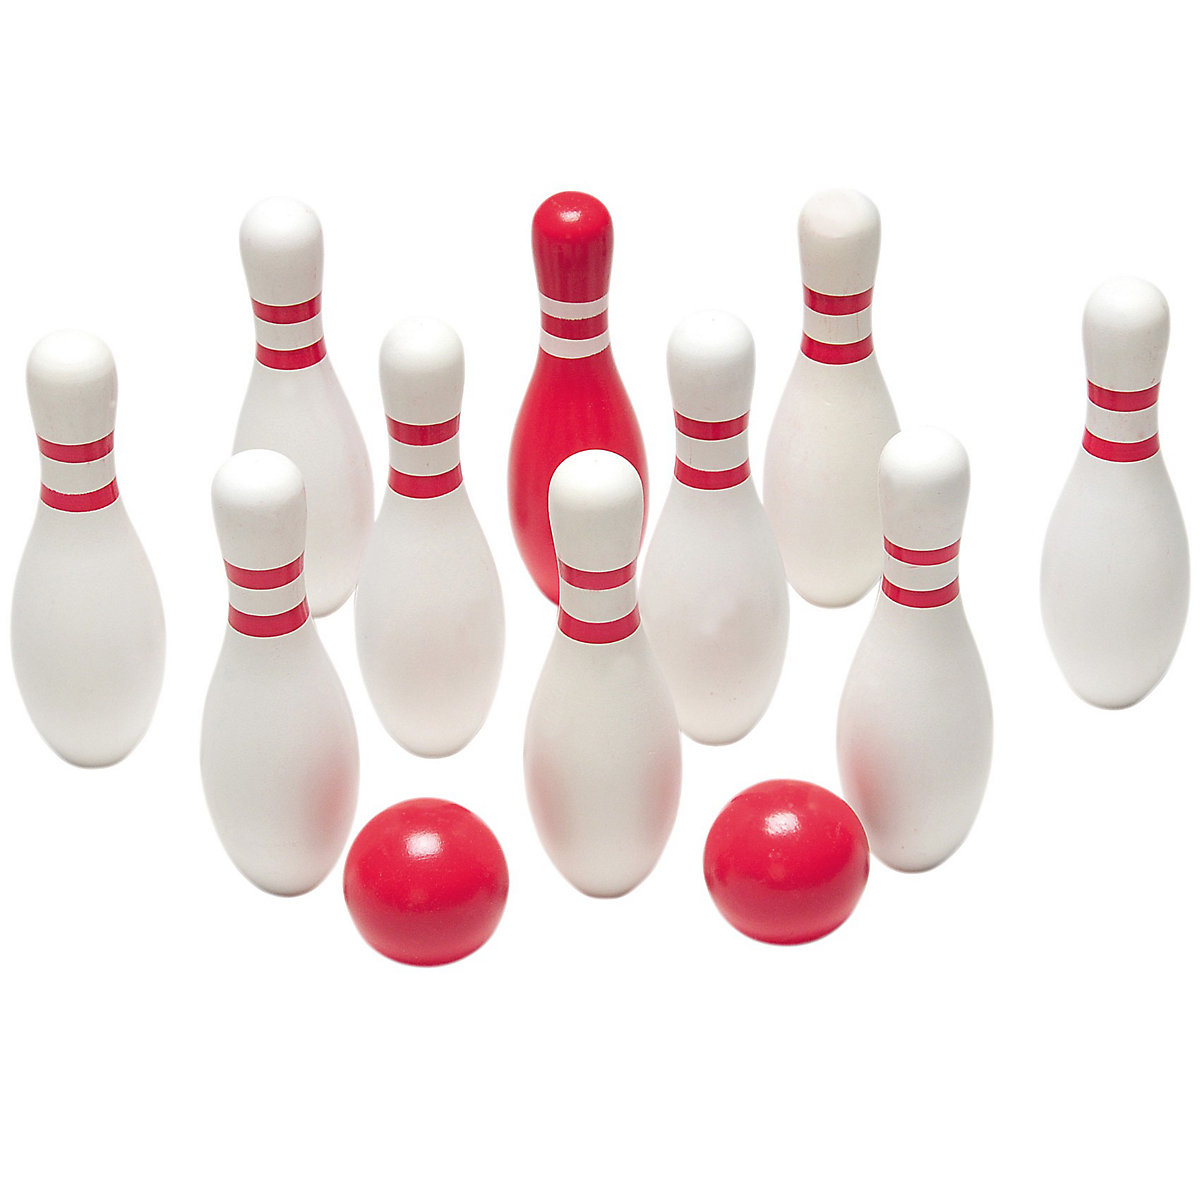 BS Toys Bowlingspiel